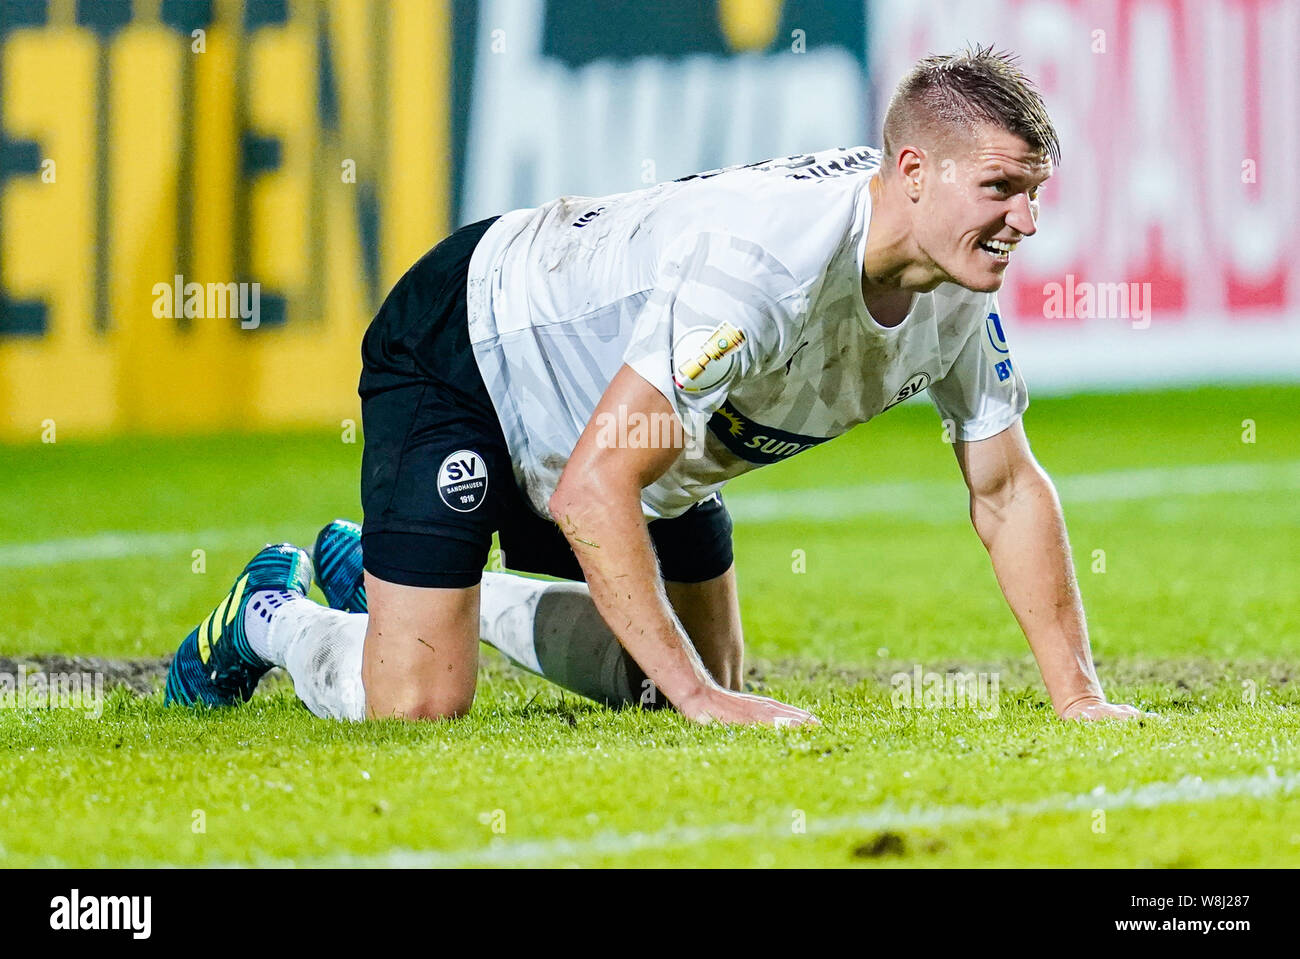 Sandhausen, Germany. 09th Aug, 2019. Soccer: DFB Cup, SV Sandhausen - Borussia Mönchengladbach, 1st round, in Hardtwaldstadion. Sandhausens Kevin Behrens kneels on the pitch. Credit: Uwe Anspach/dpa - IMPORTANT NOTE: In accordance with the requirements of the DFL Deutsche Fußball Liga or the DFB Deutscher Fußball-Bund, it is prohibited to use or have used photographs taken in the stadium and/or the match in the form of sequence images and/or video-like photo sequences./dpa/Alamy Live News Stock Photo